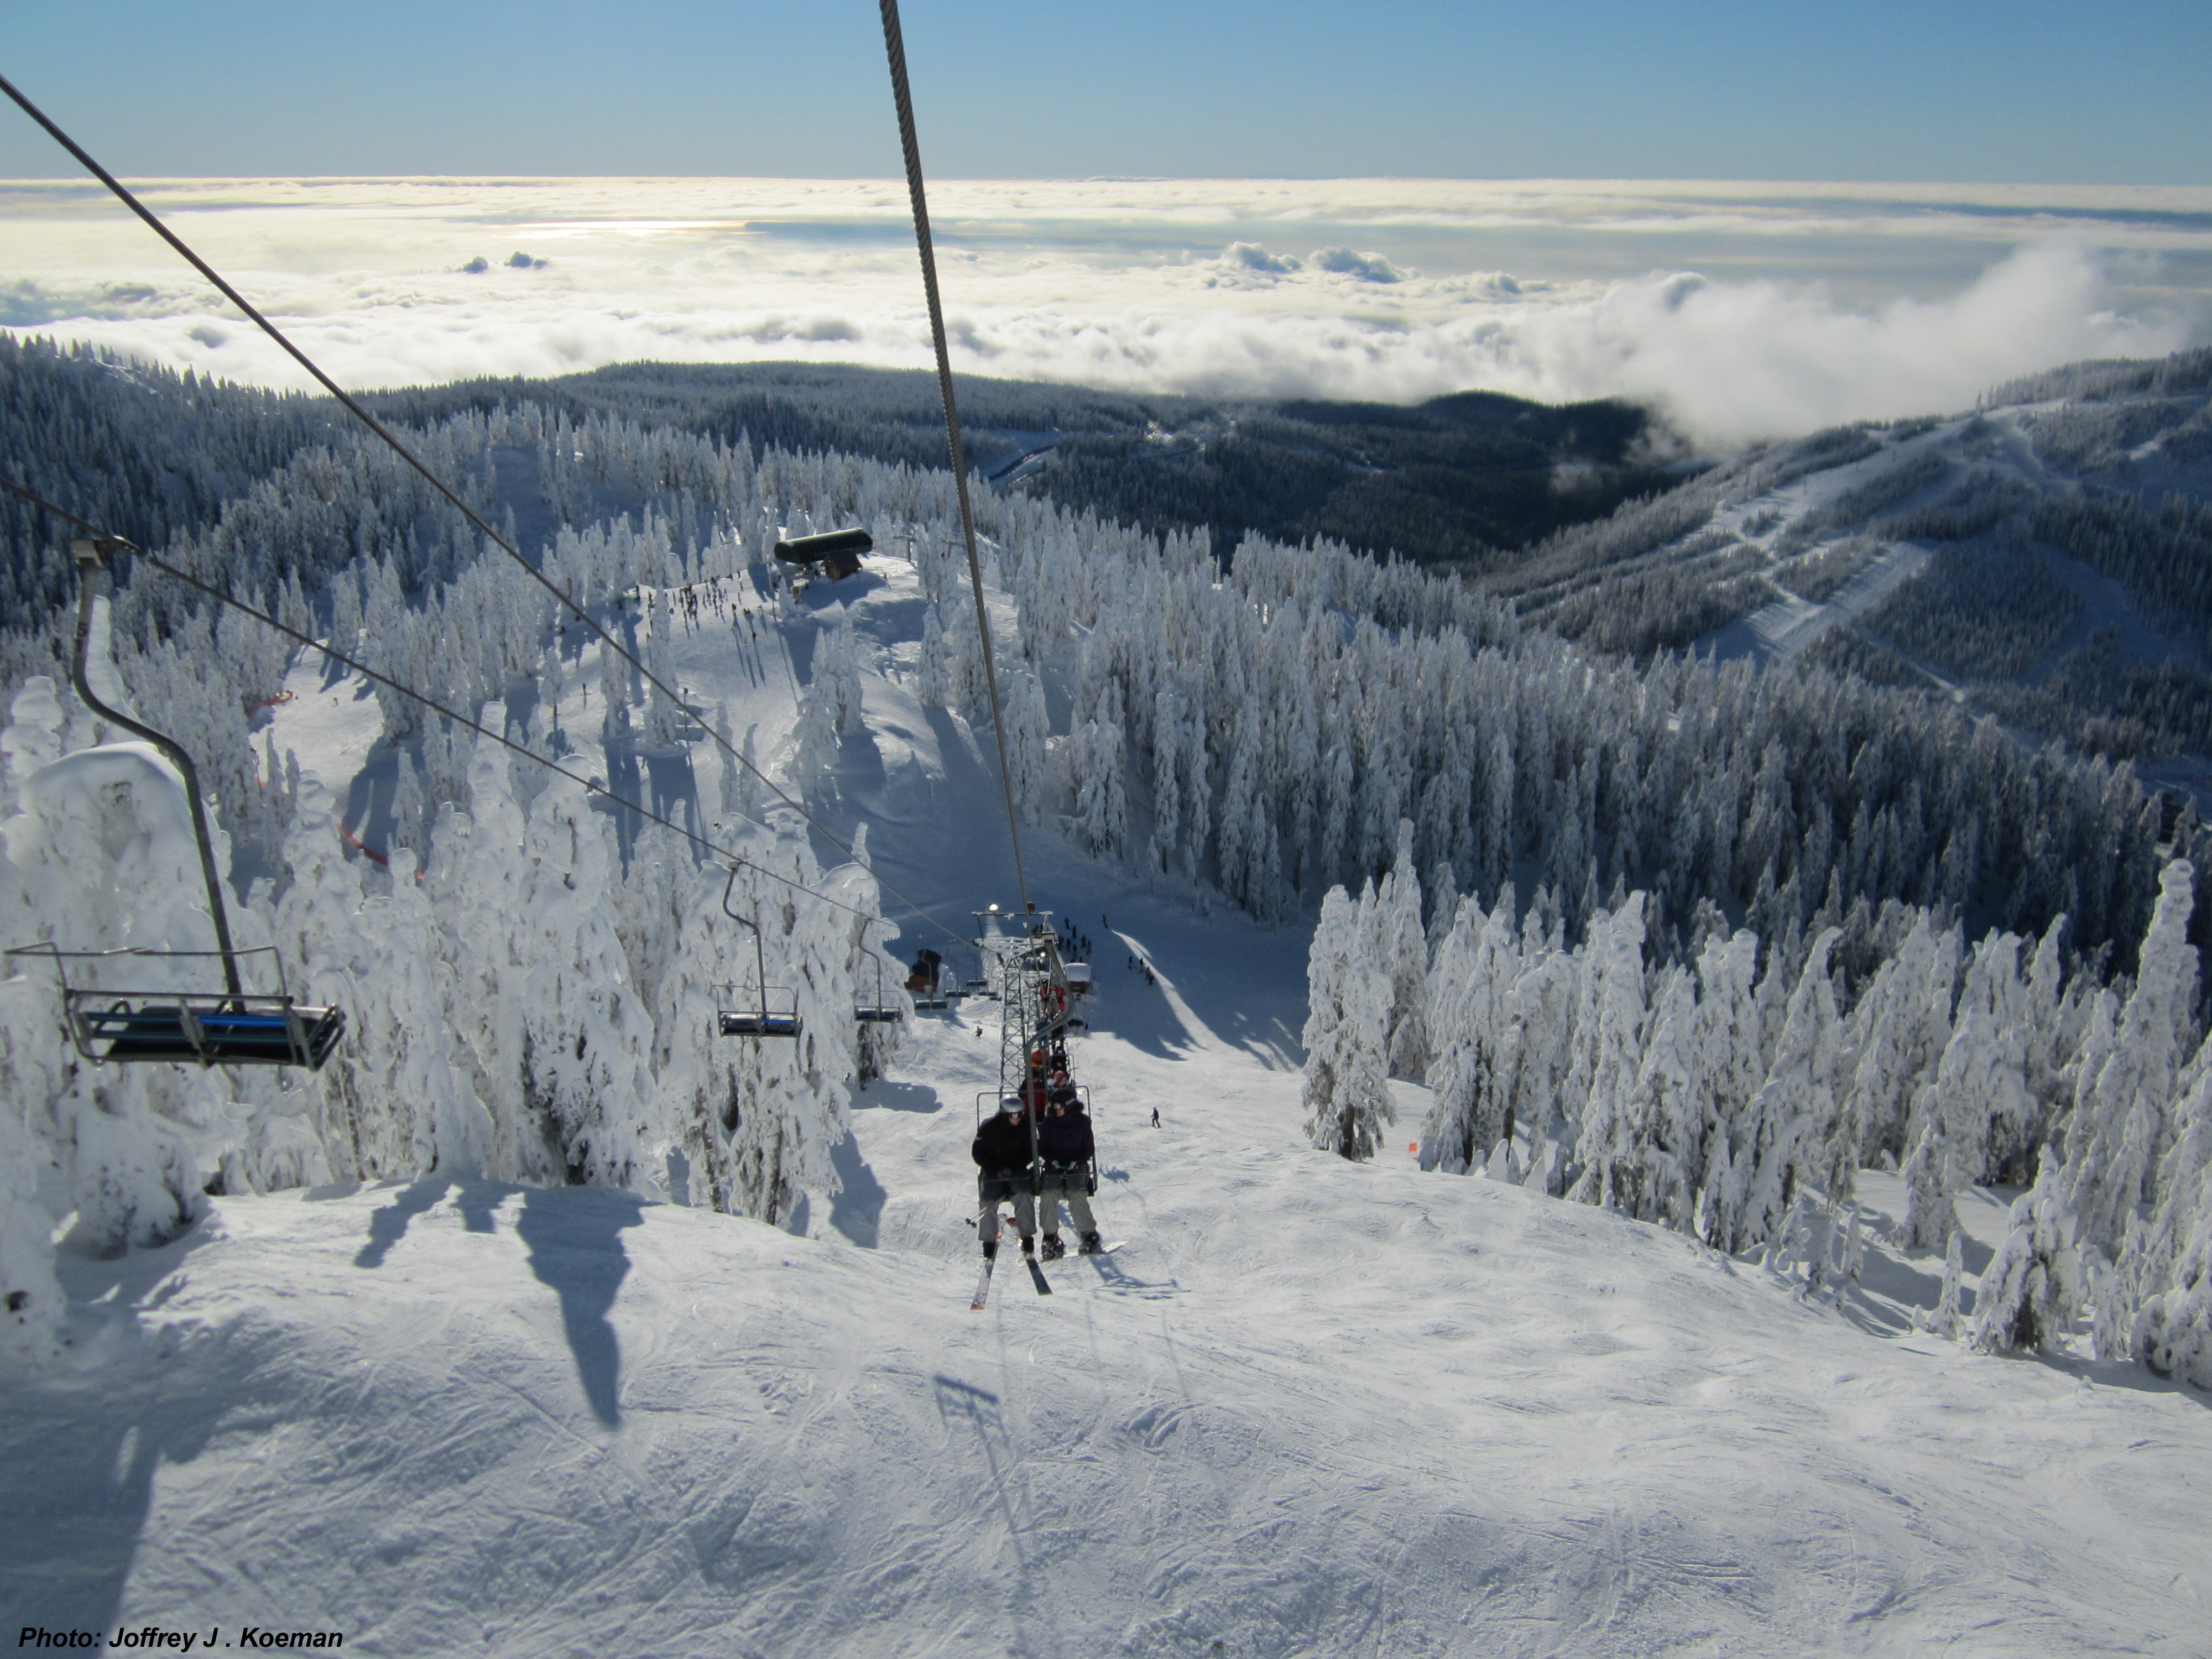 Sky Chair with Lions Express and Raven Ridge Chairs in the background, Cypress Mountain